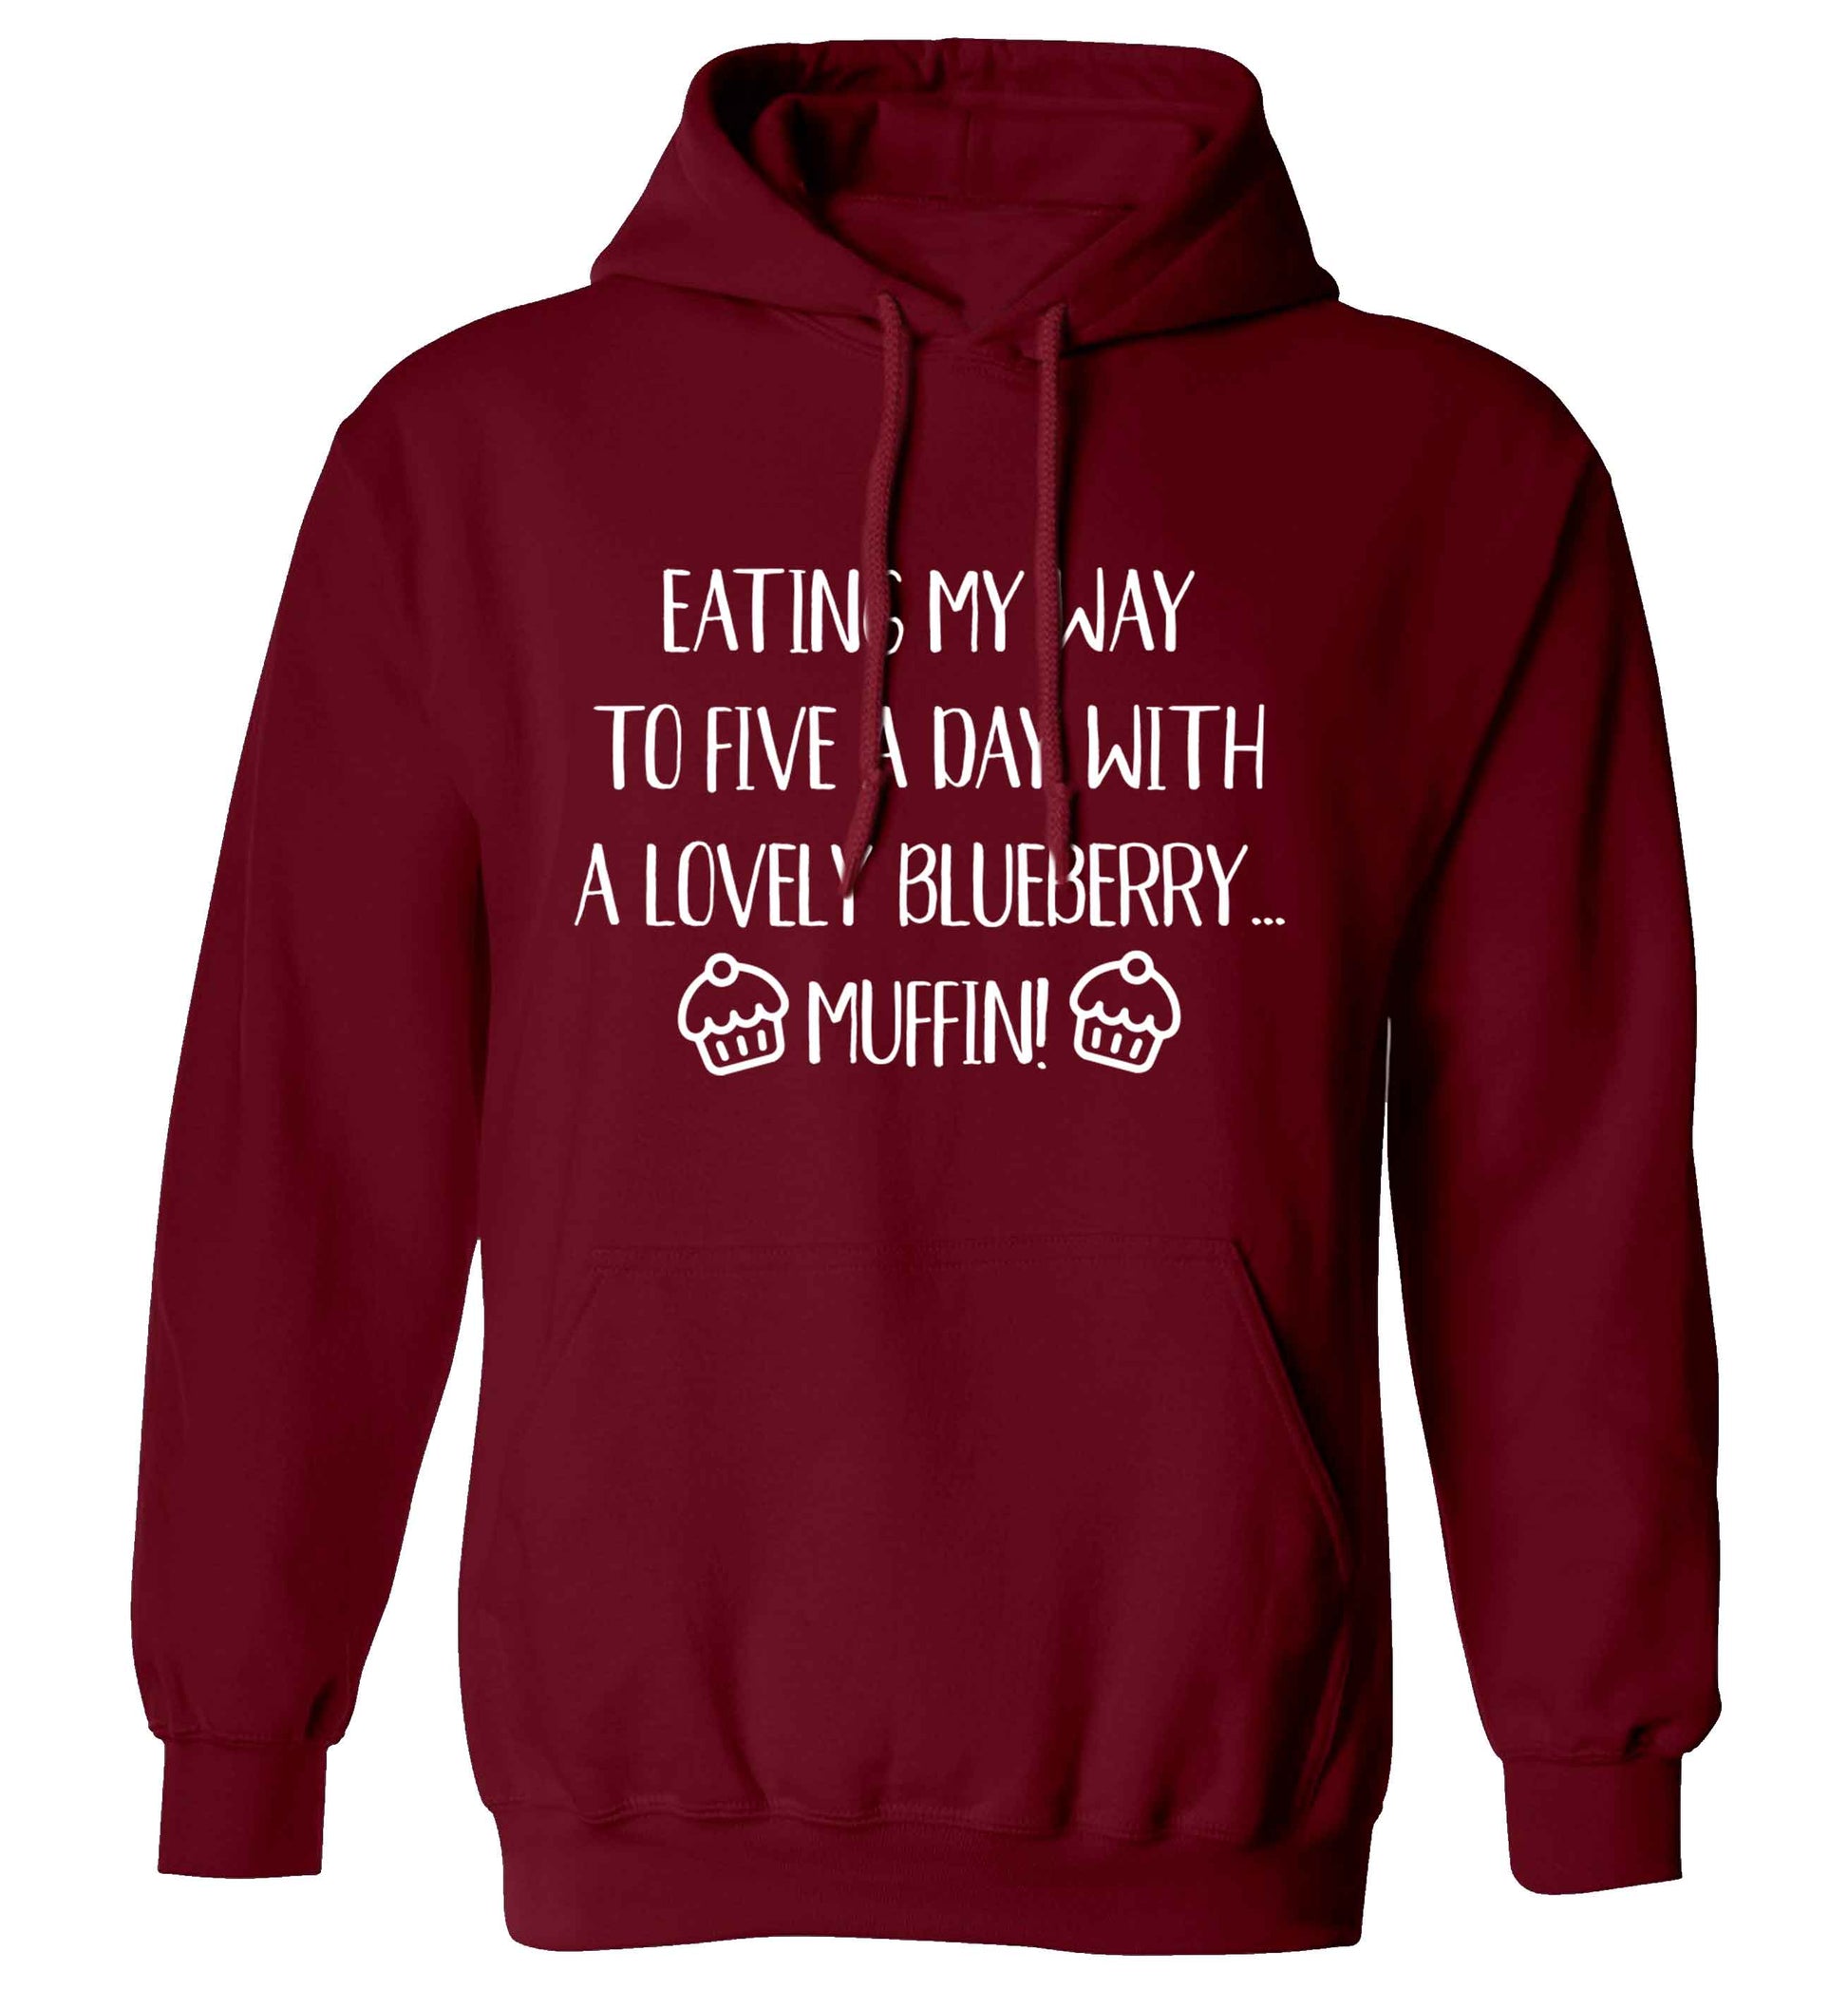 Eating my way to five a day with a lovely blueberry muffin adults unisex maroon hoodie 2XL